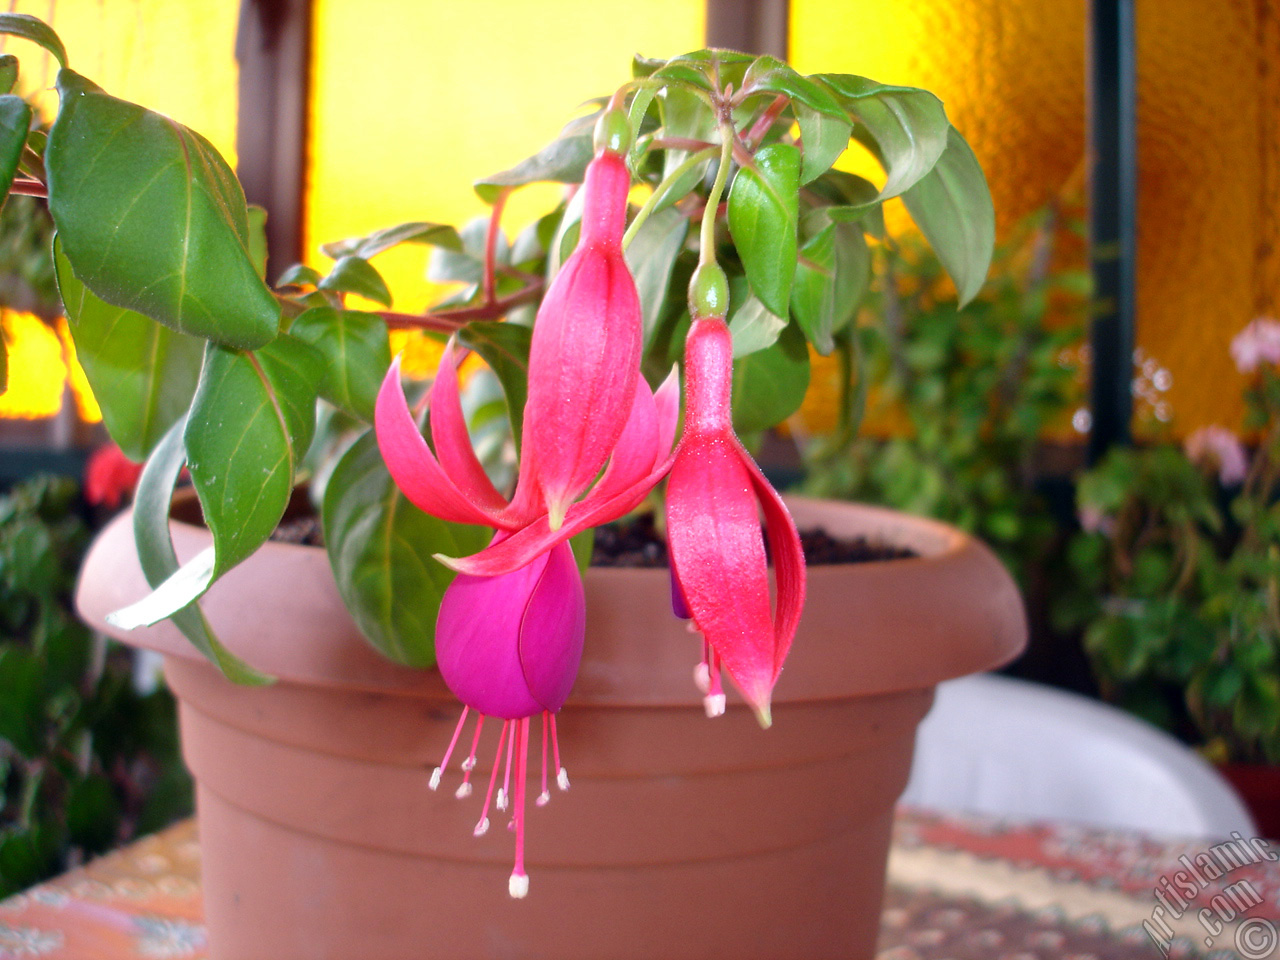 Red and purple color Fuchsia Hybrid flower.
